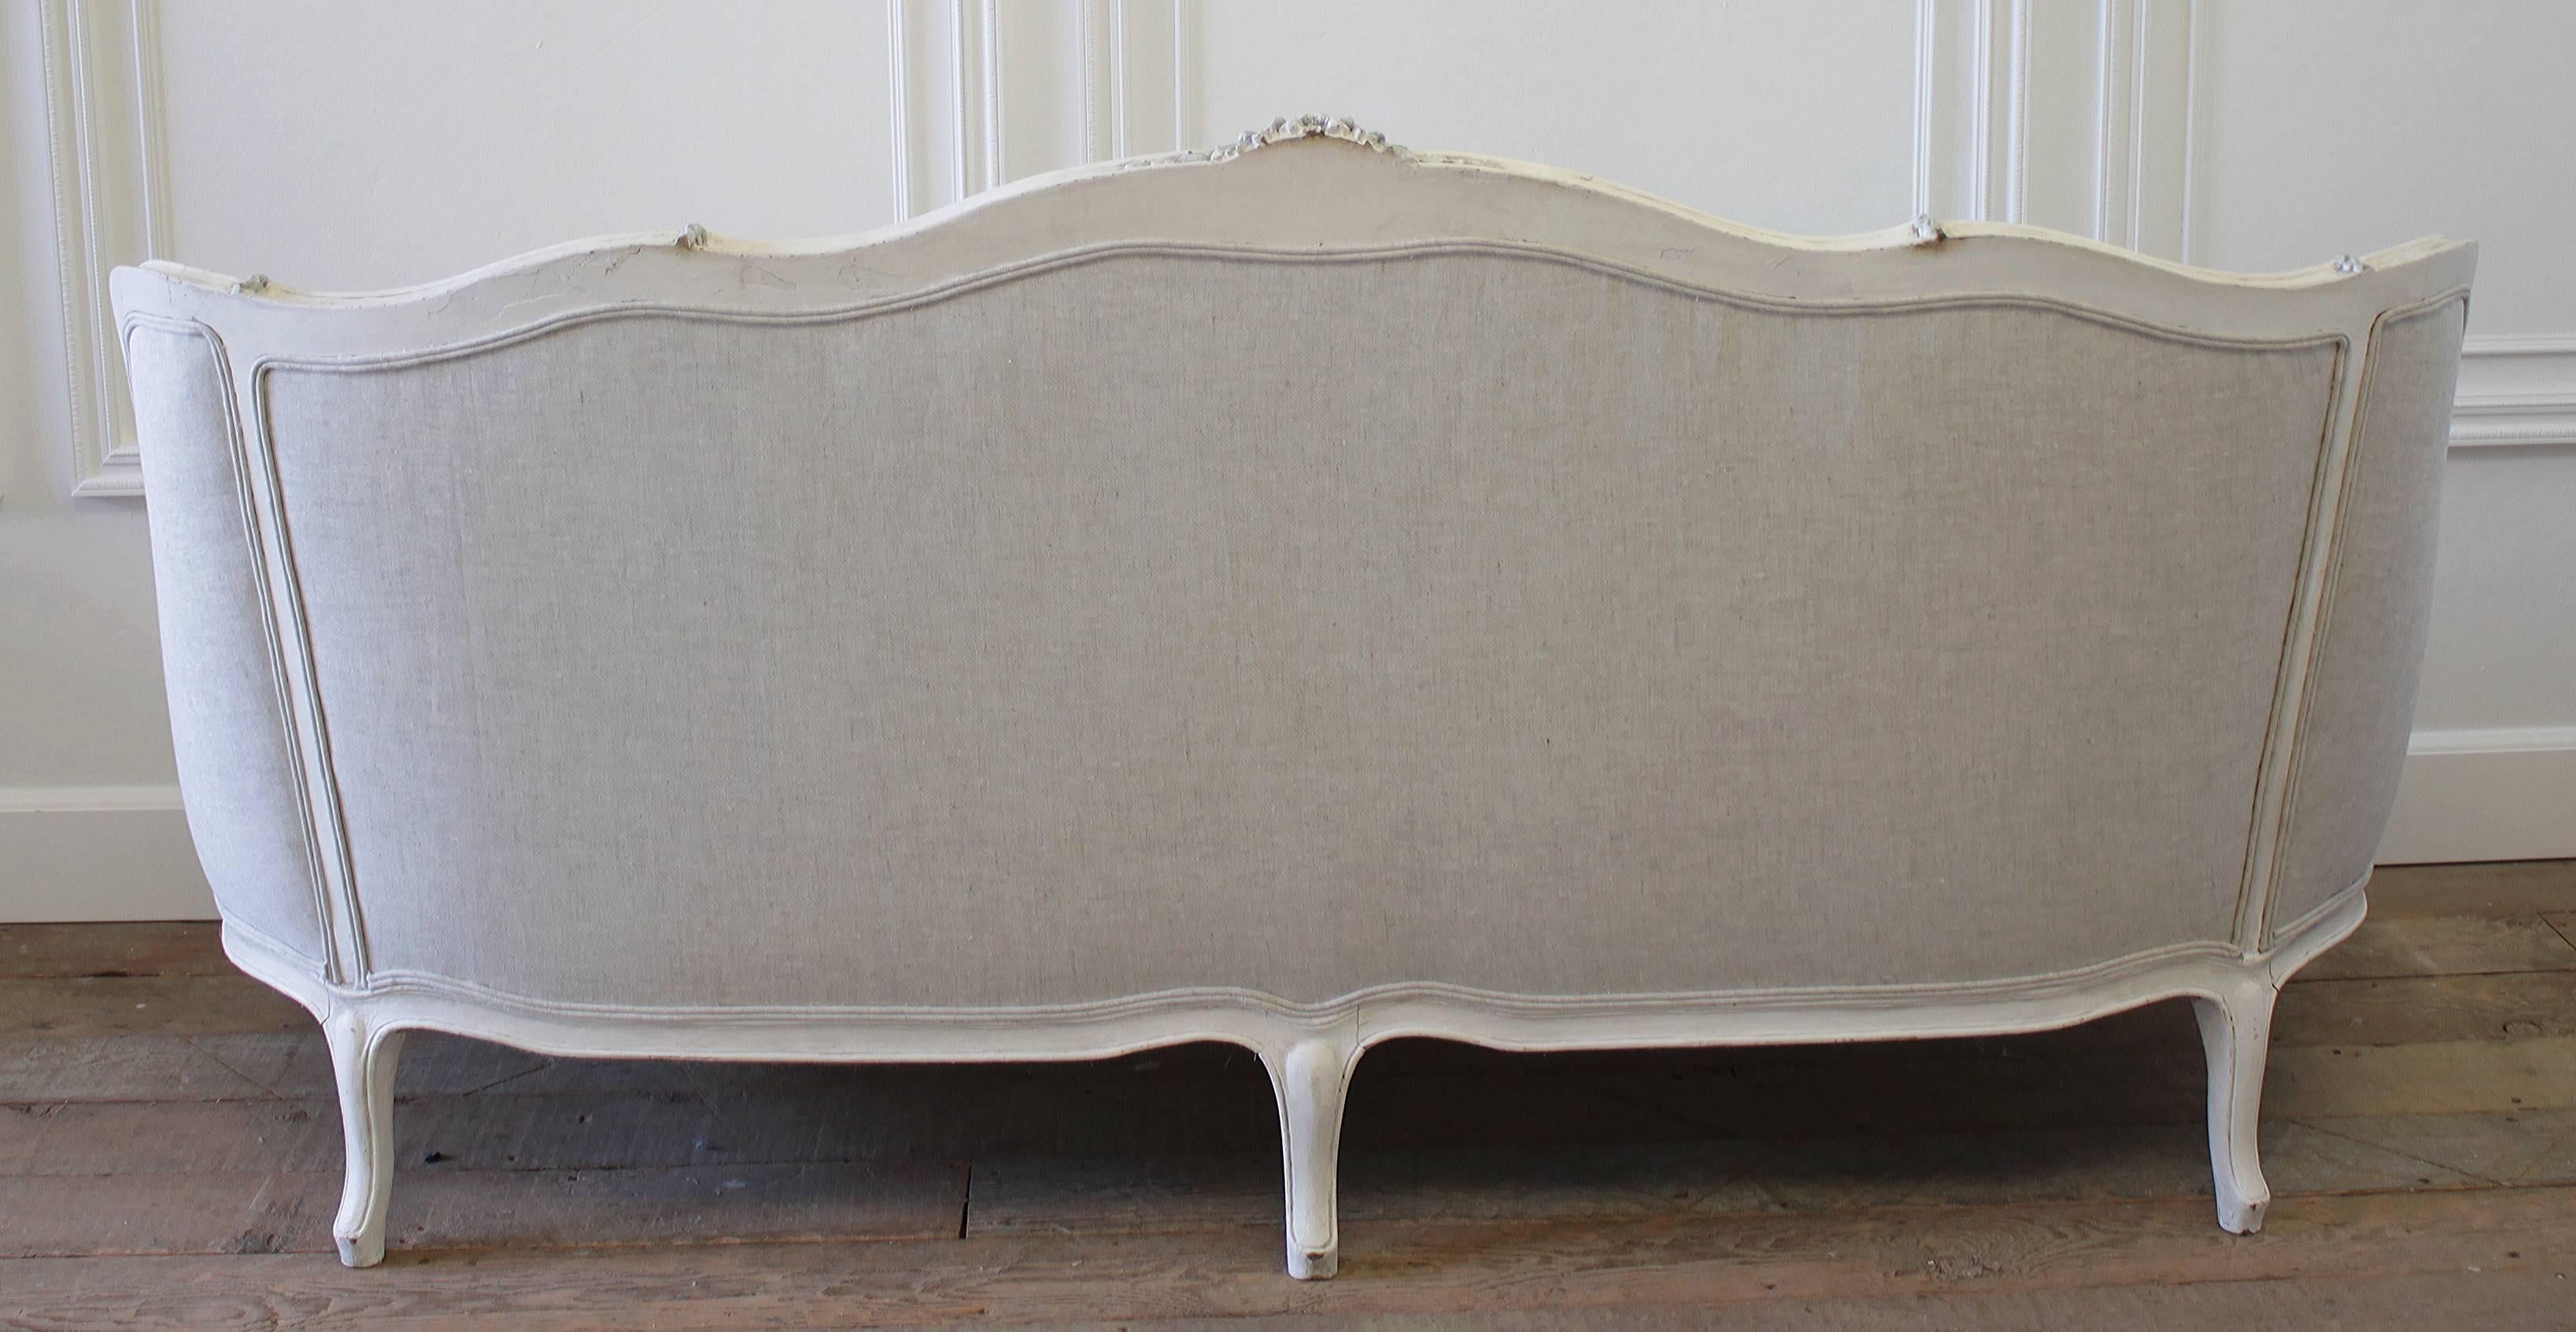 19th Century Antique Painted French Sofa in the Louis XV Style Upholstered in Belgian Linen